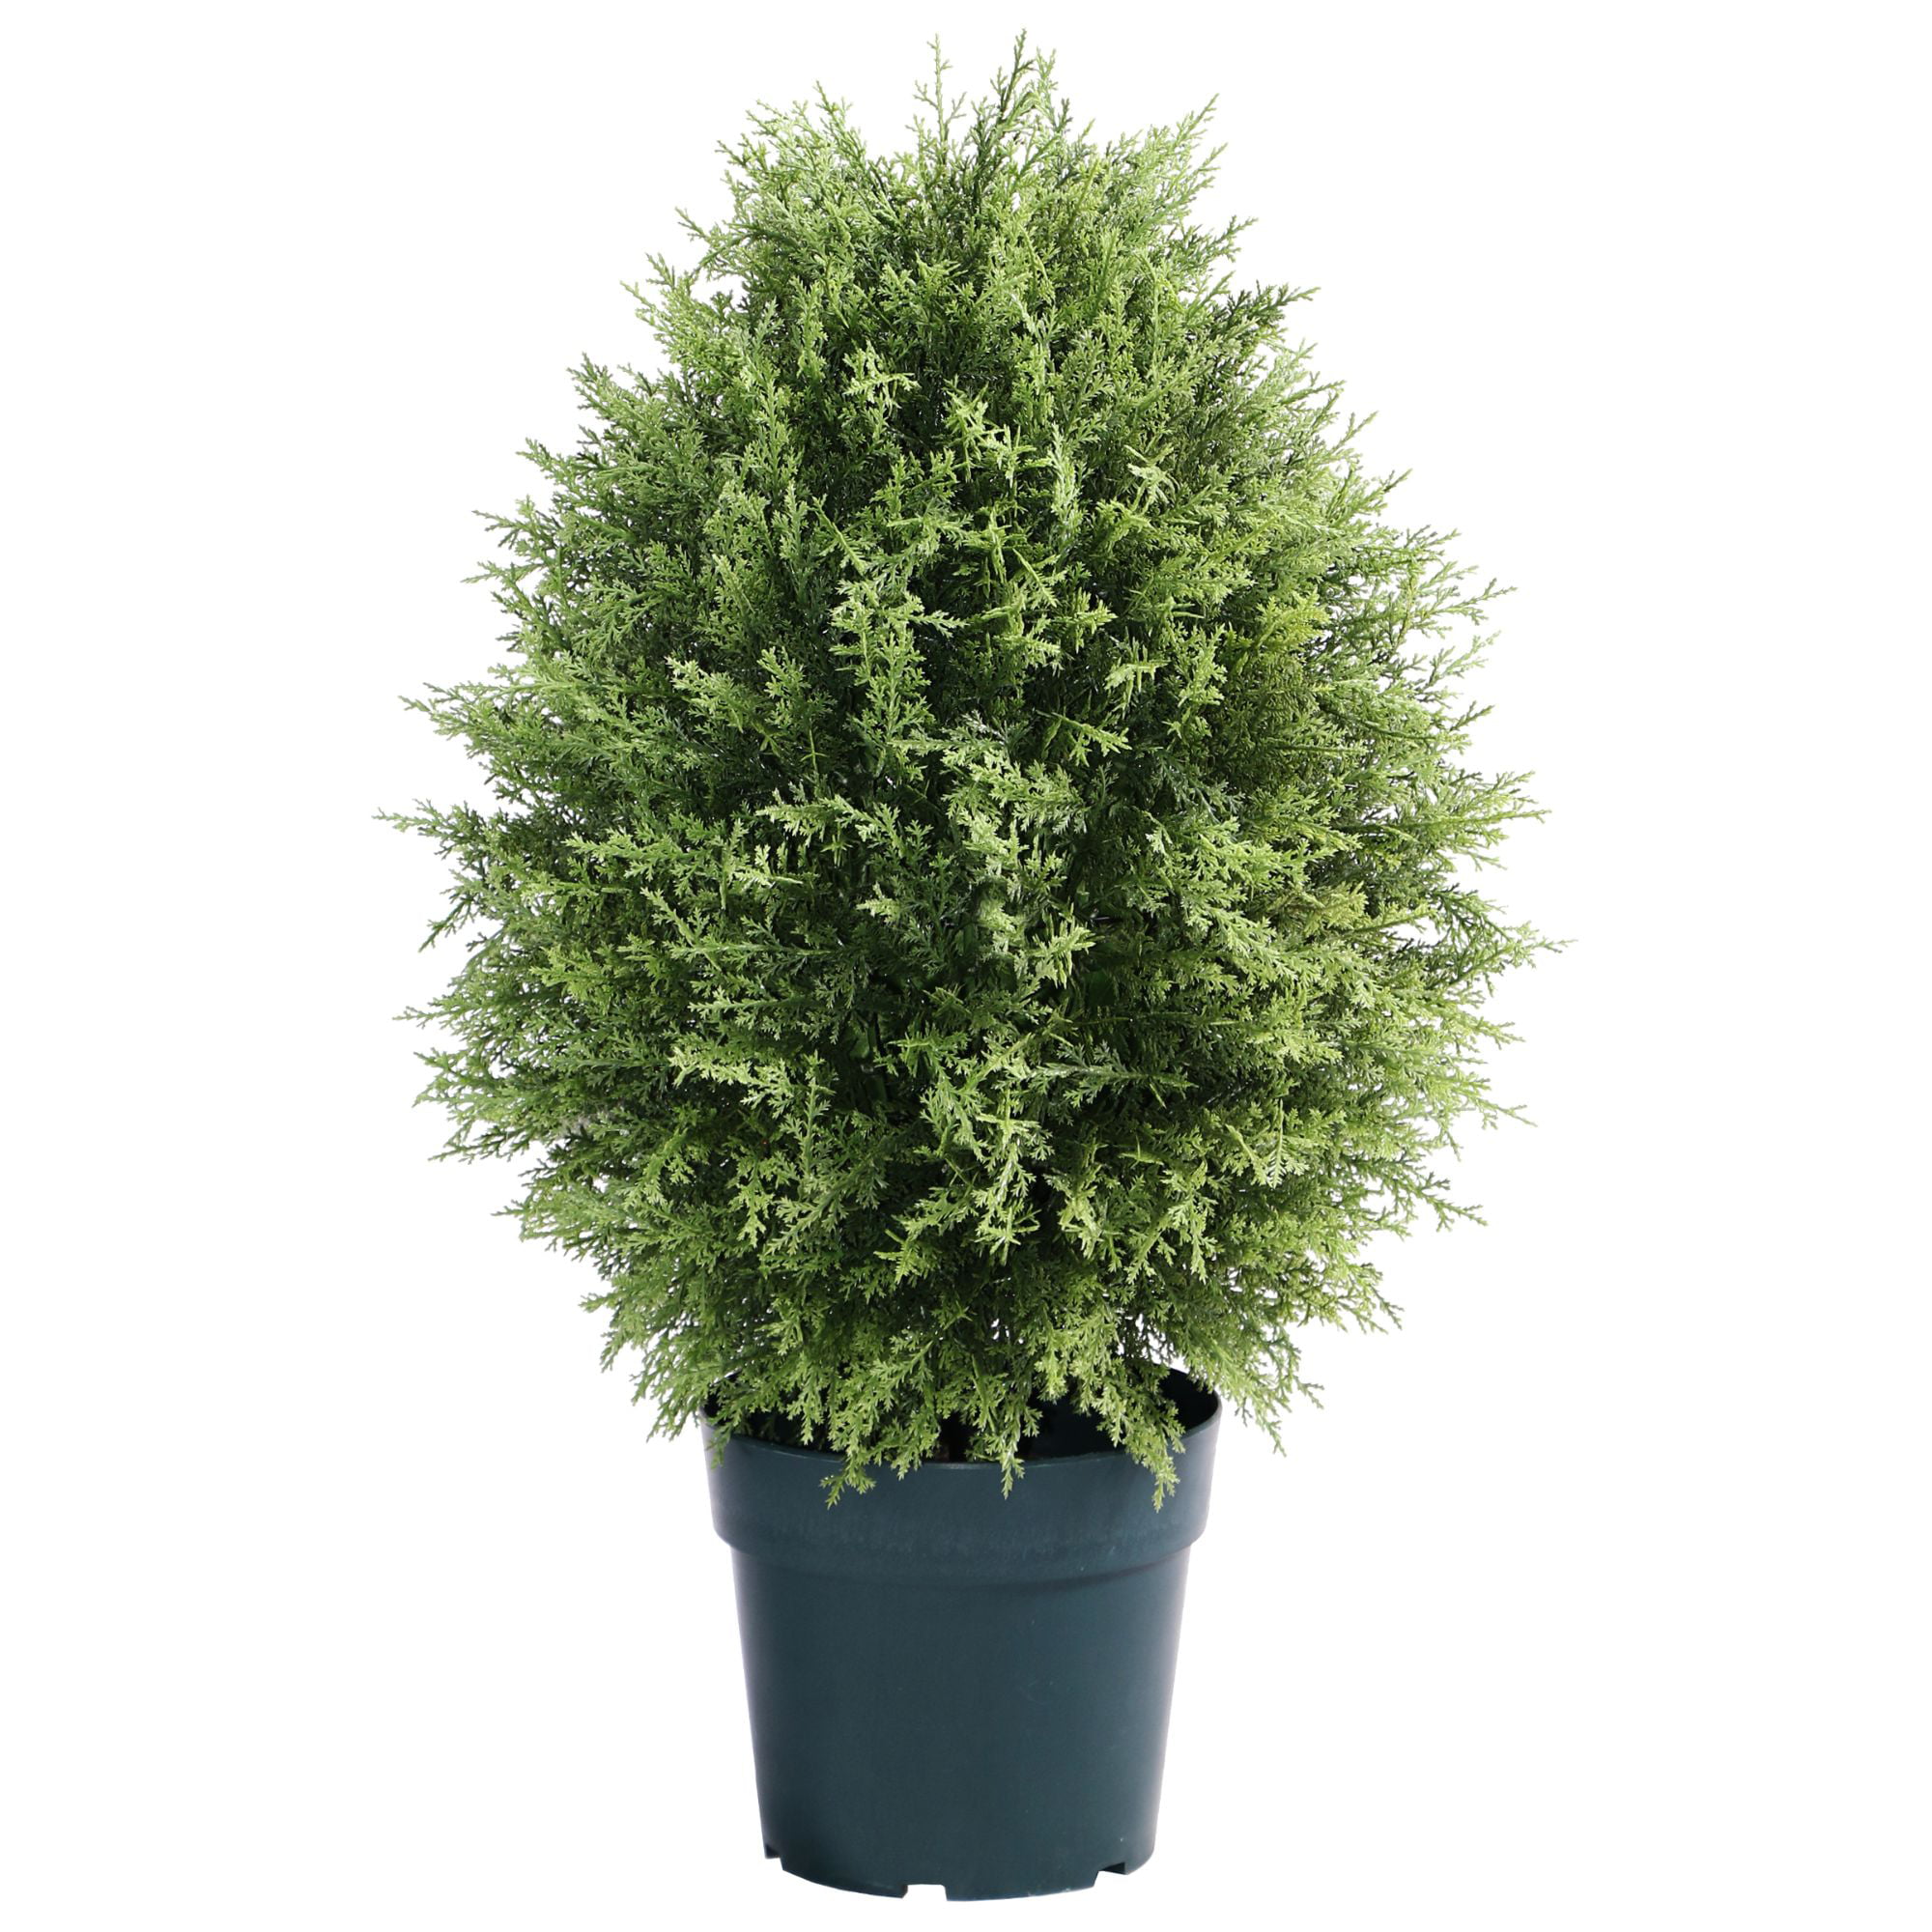 Potted cypress tree